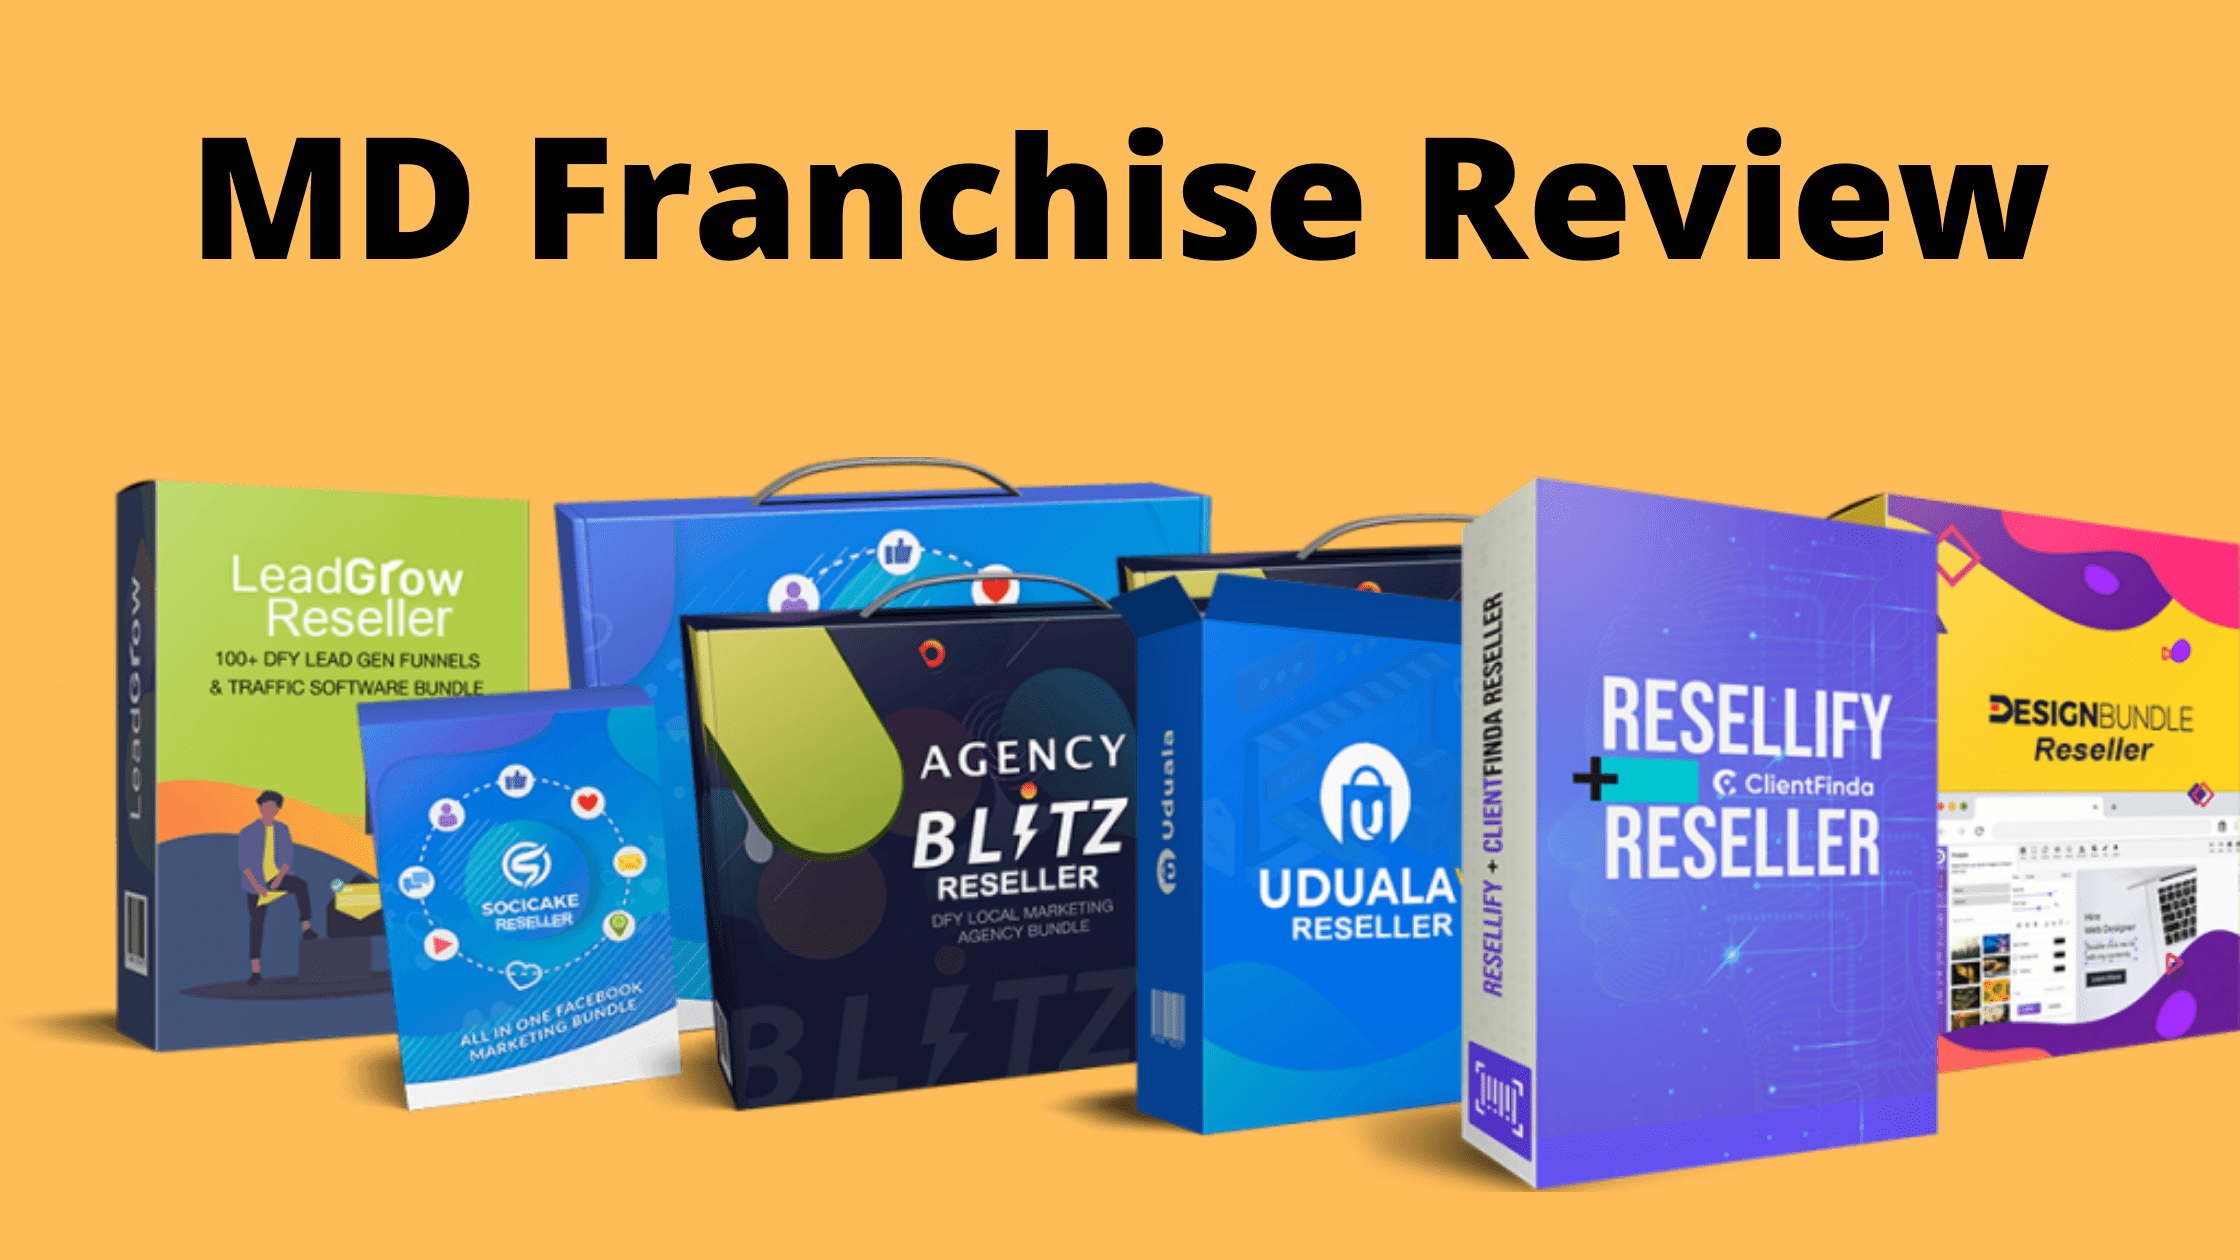 MD Franchise Review